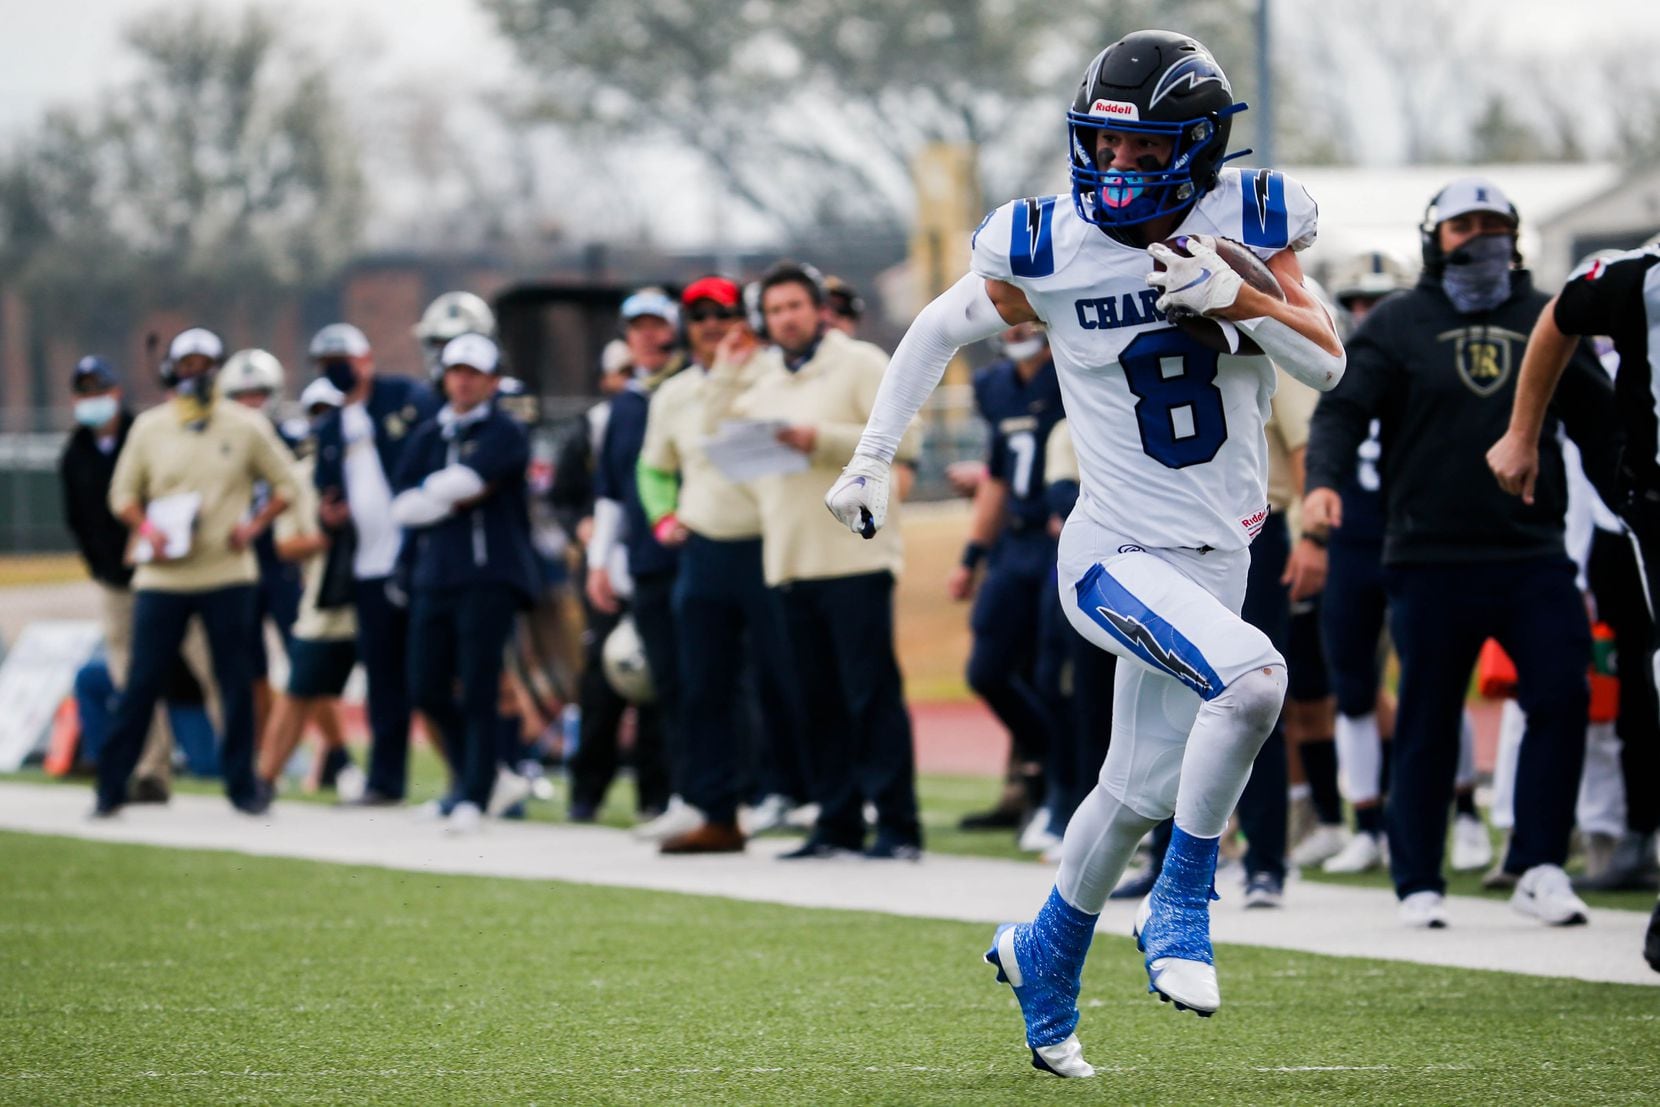 Dallas Christian's Parker Robertson (8) runs in a touchdown against Austin Regents during the first half of a TAPPS Division II state championship game at Midway's Panther Stadium in Hewitt on Saturday, Dec. 19, 2020. 